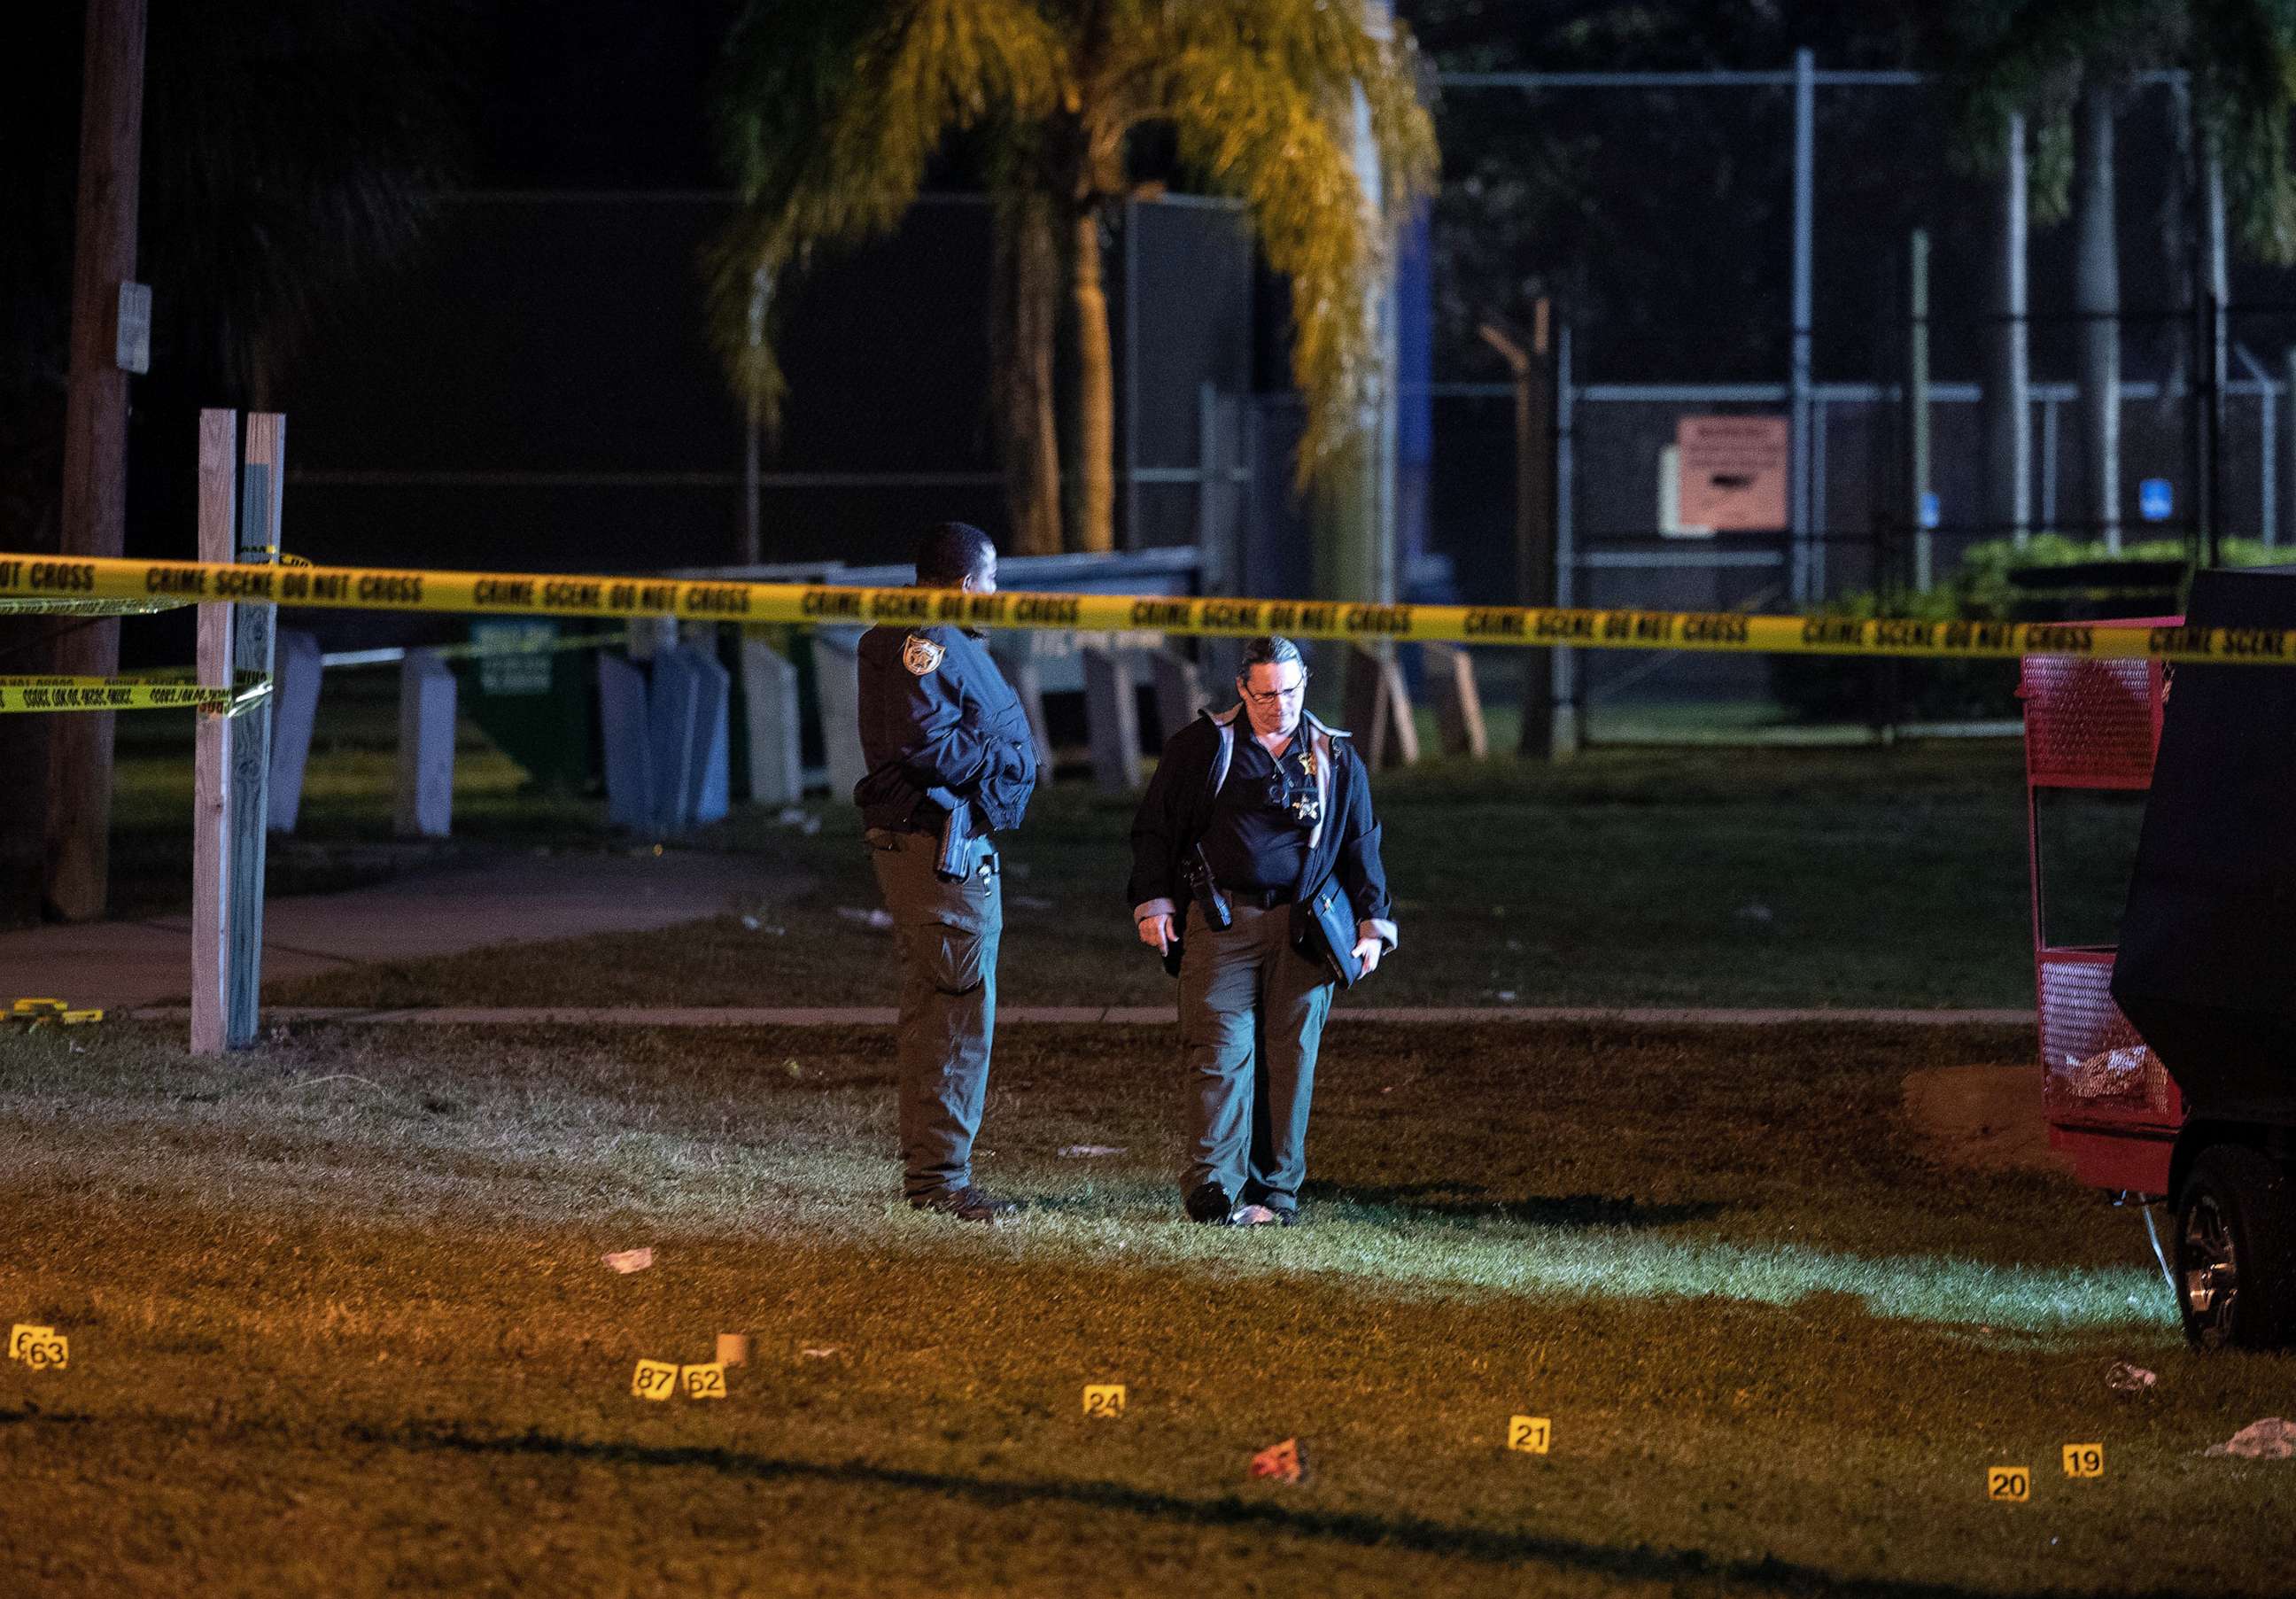 PHOTO: St. Lucie County Sheriff deputies work at a crime scene following a shooting during a Martin Luther King Jr. Day event in Fort Pierce, Fla., Jan. 17, 2023.